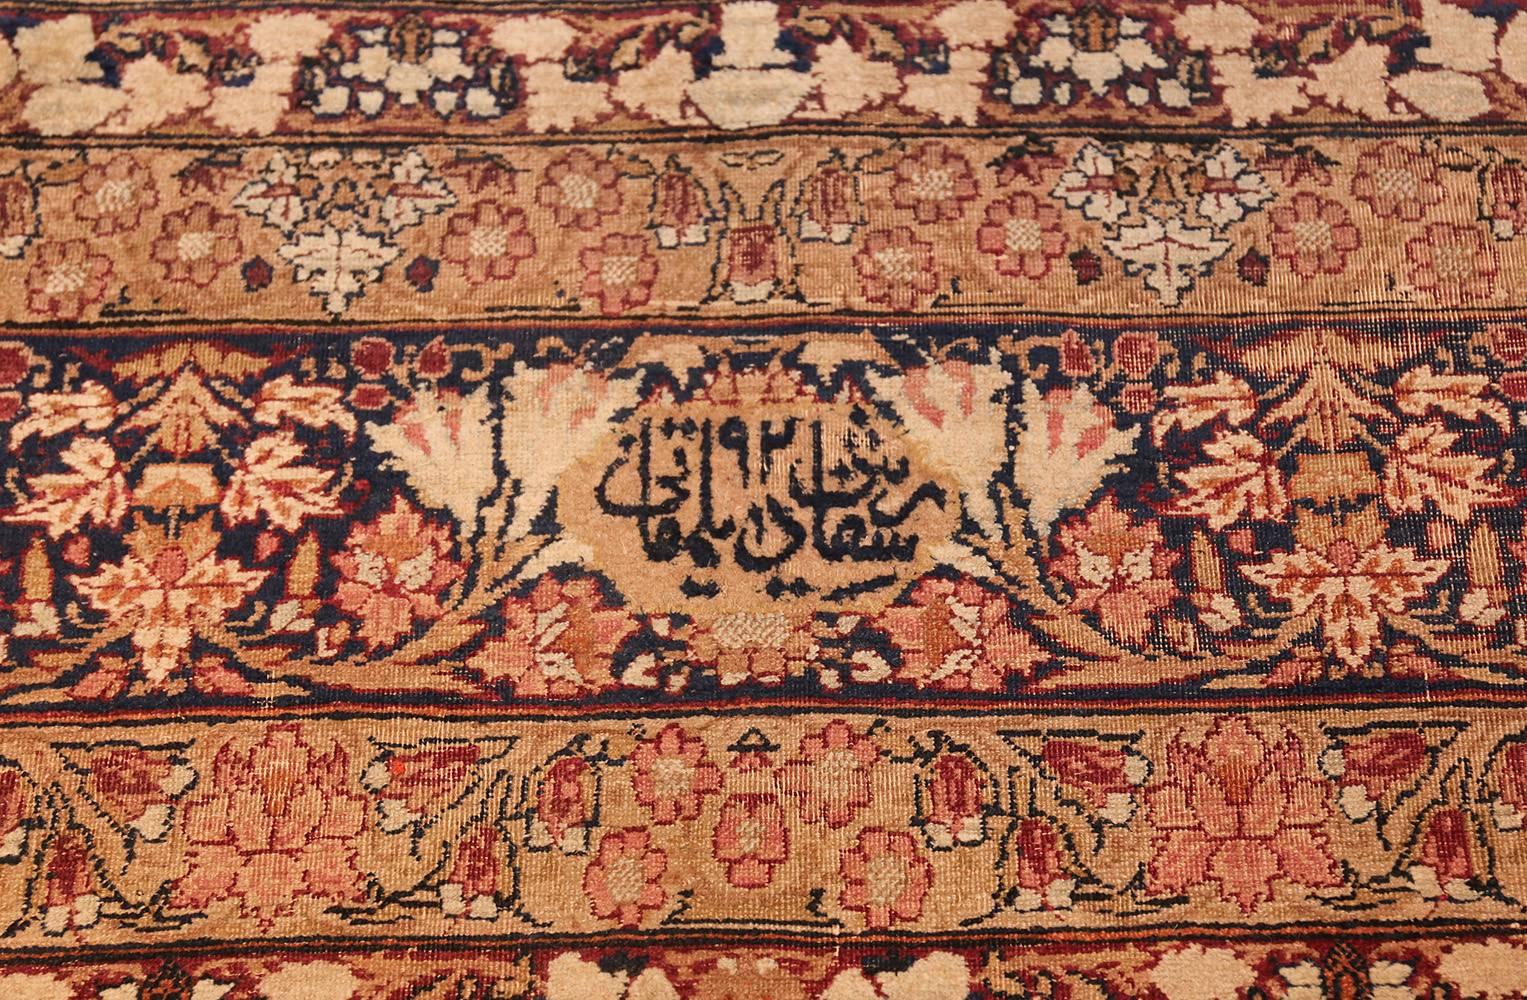 Antique Persian Kerman Rug, Country of Origin: Persia, Circa Date: Late 19th Century. Size: 8 ft 8 in x 12 ft 3 in (2.64 m x 3.73 m)

This exquisite antique Kerman is inspired by the fabric and wallpapers designed by William Morris. It depicts an